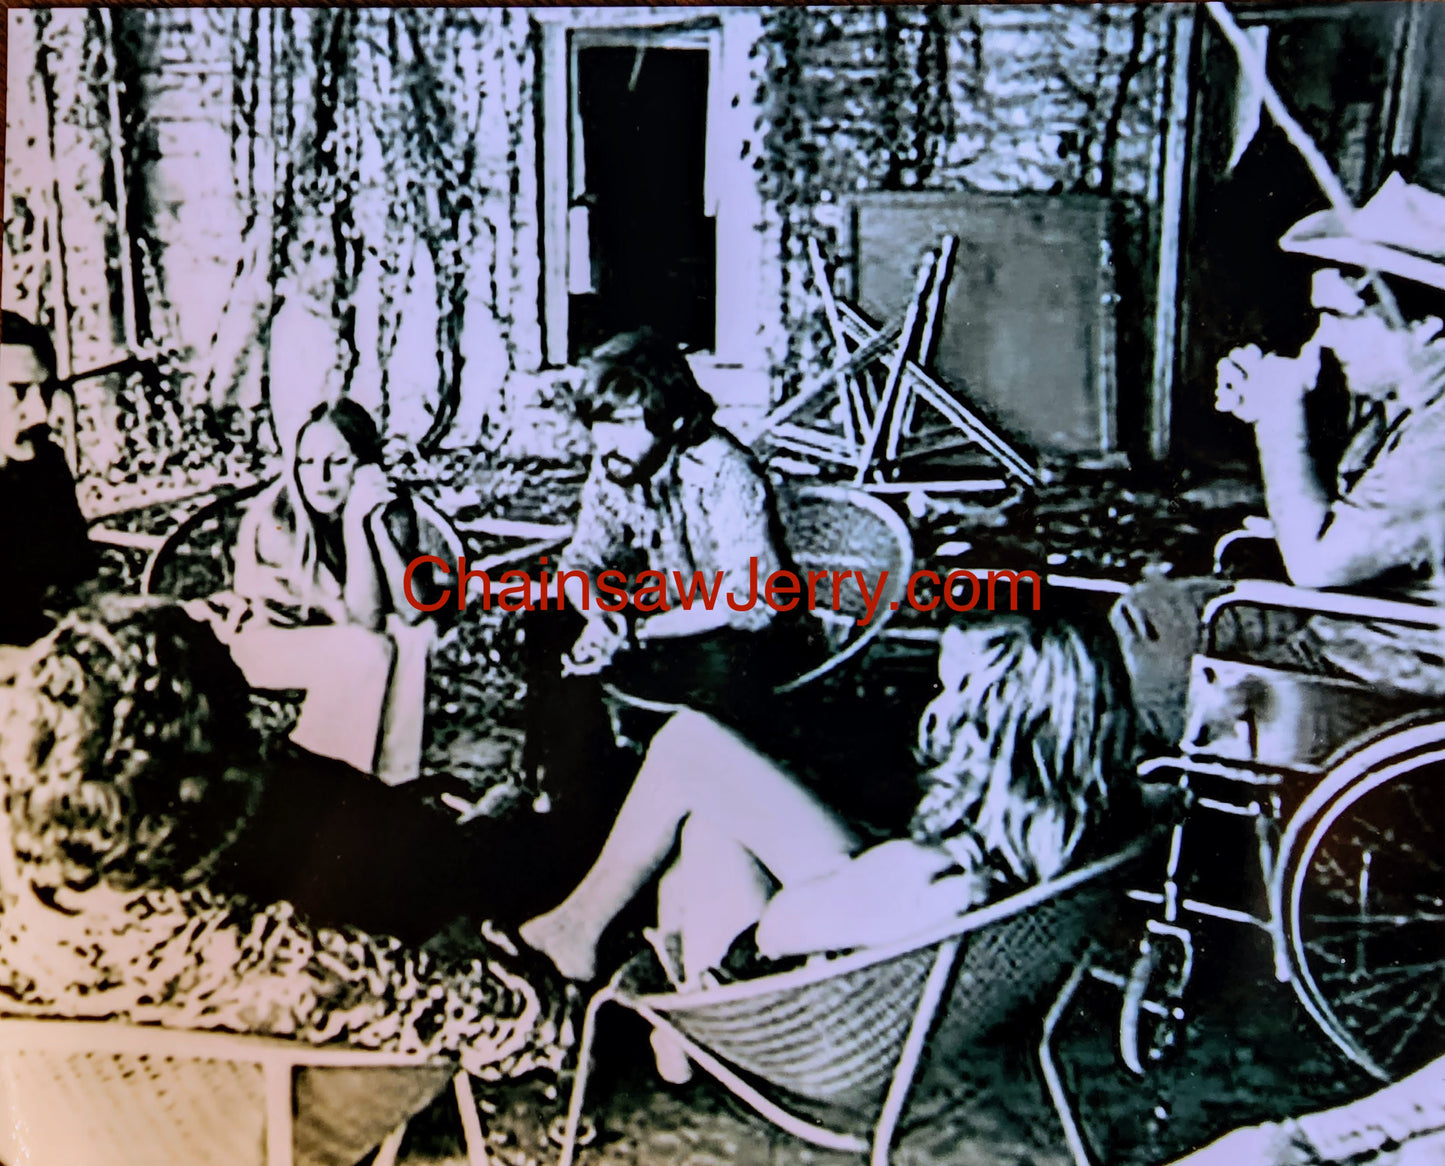 Texas Chainsaw Massacre "Meeting with Tobe" Photo Signed by Allen Danziger